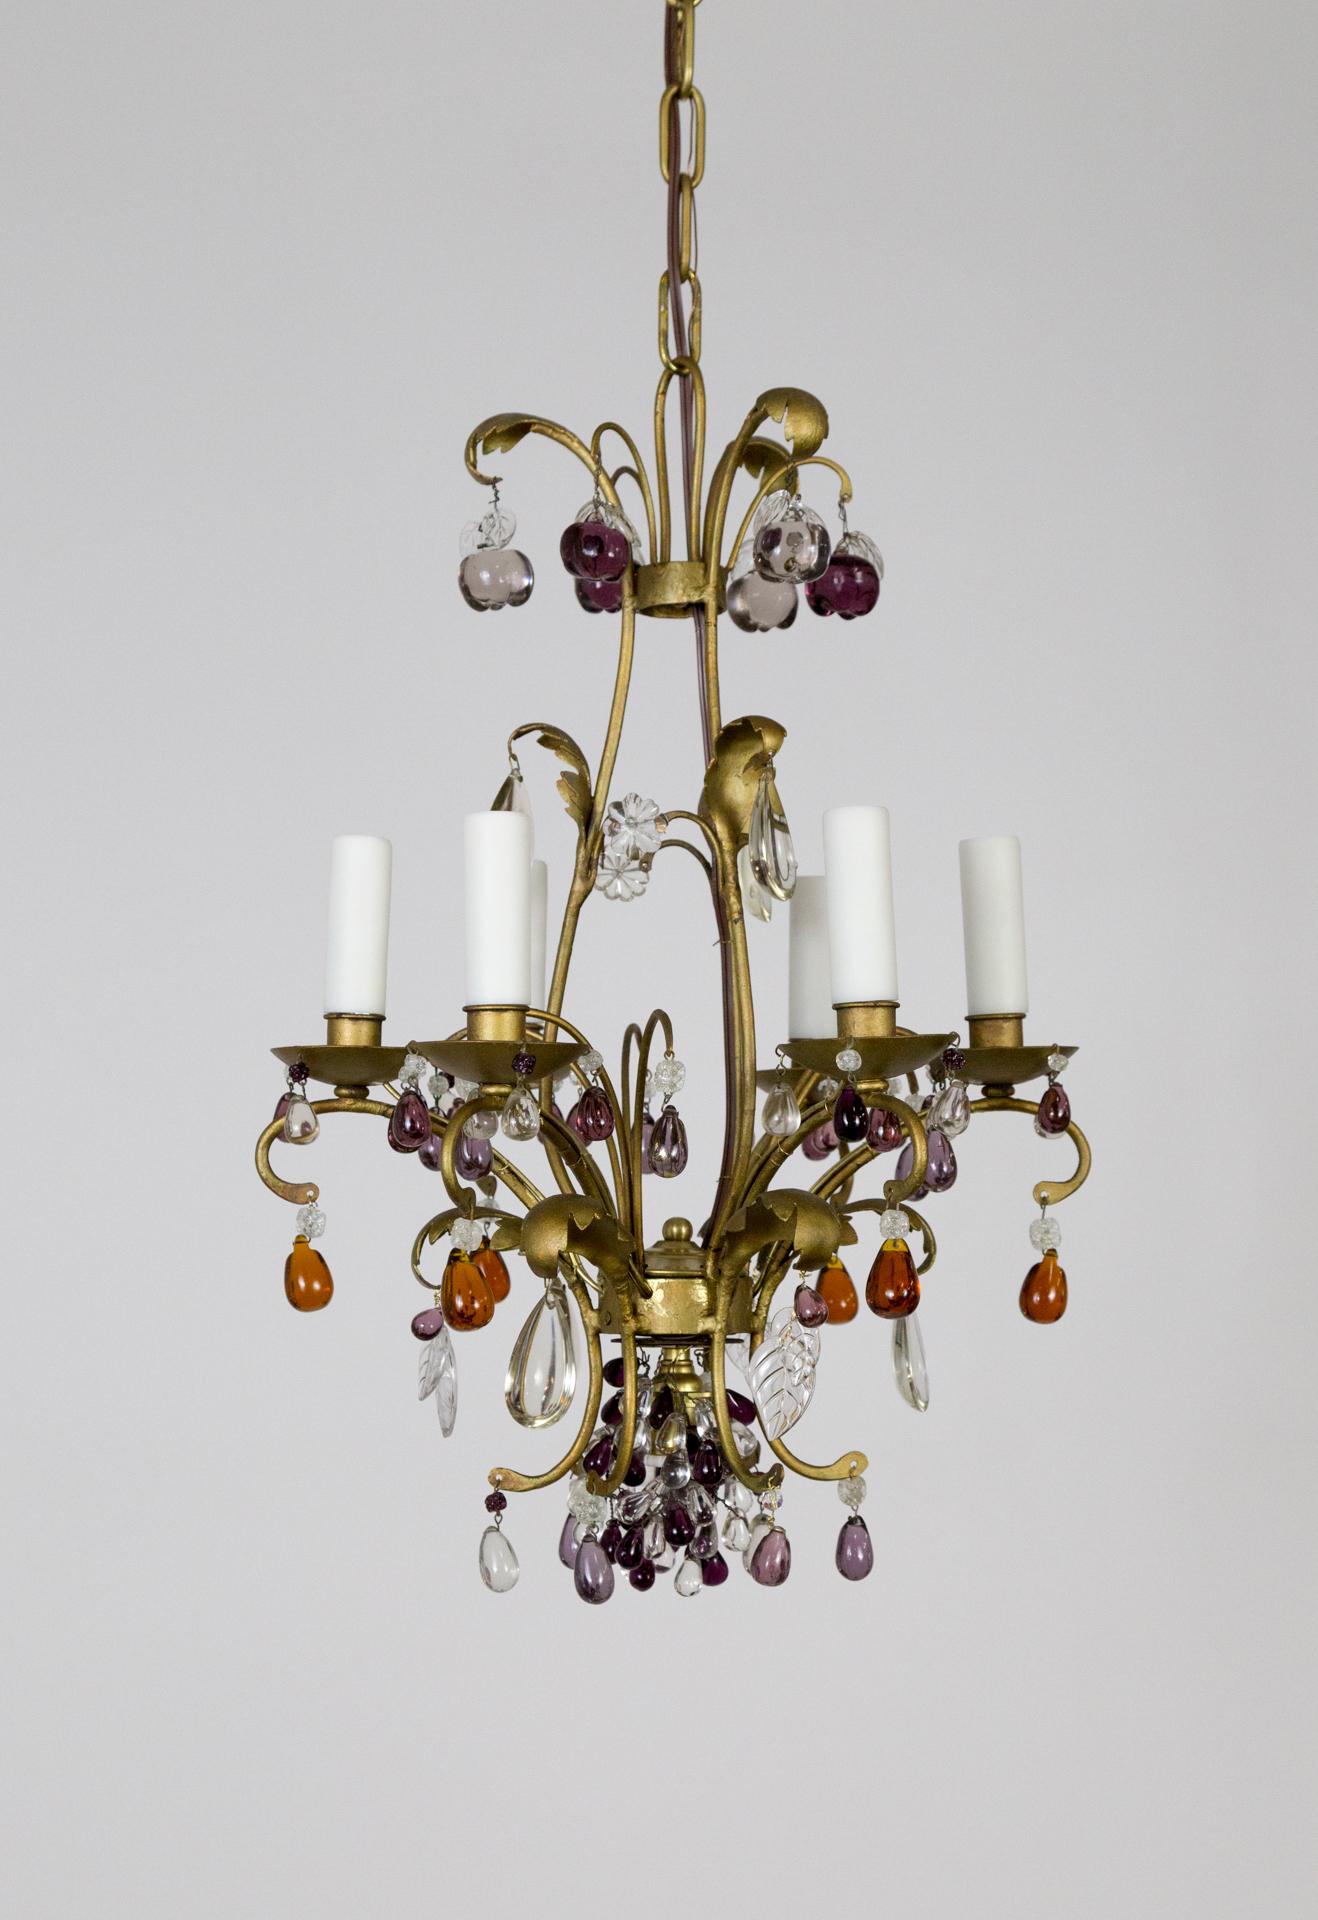 A gilt brass chandelier with dangling crystal fruit in amber, purple, amethyst, and clear. Apples hang from the crown and grape clusters at the bottom; with a downward socket within to illuminate them. It is a well-balanced shape, with 6 candlestick